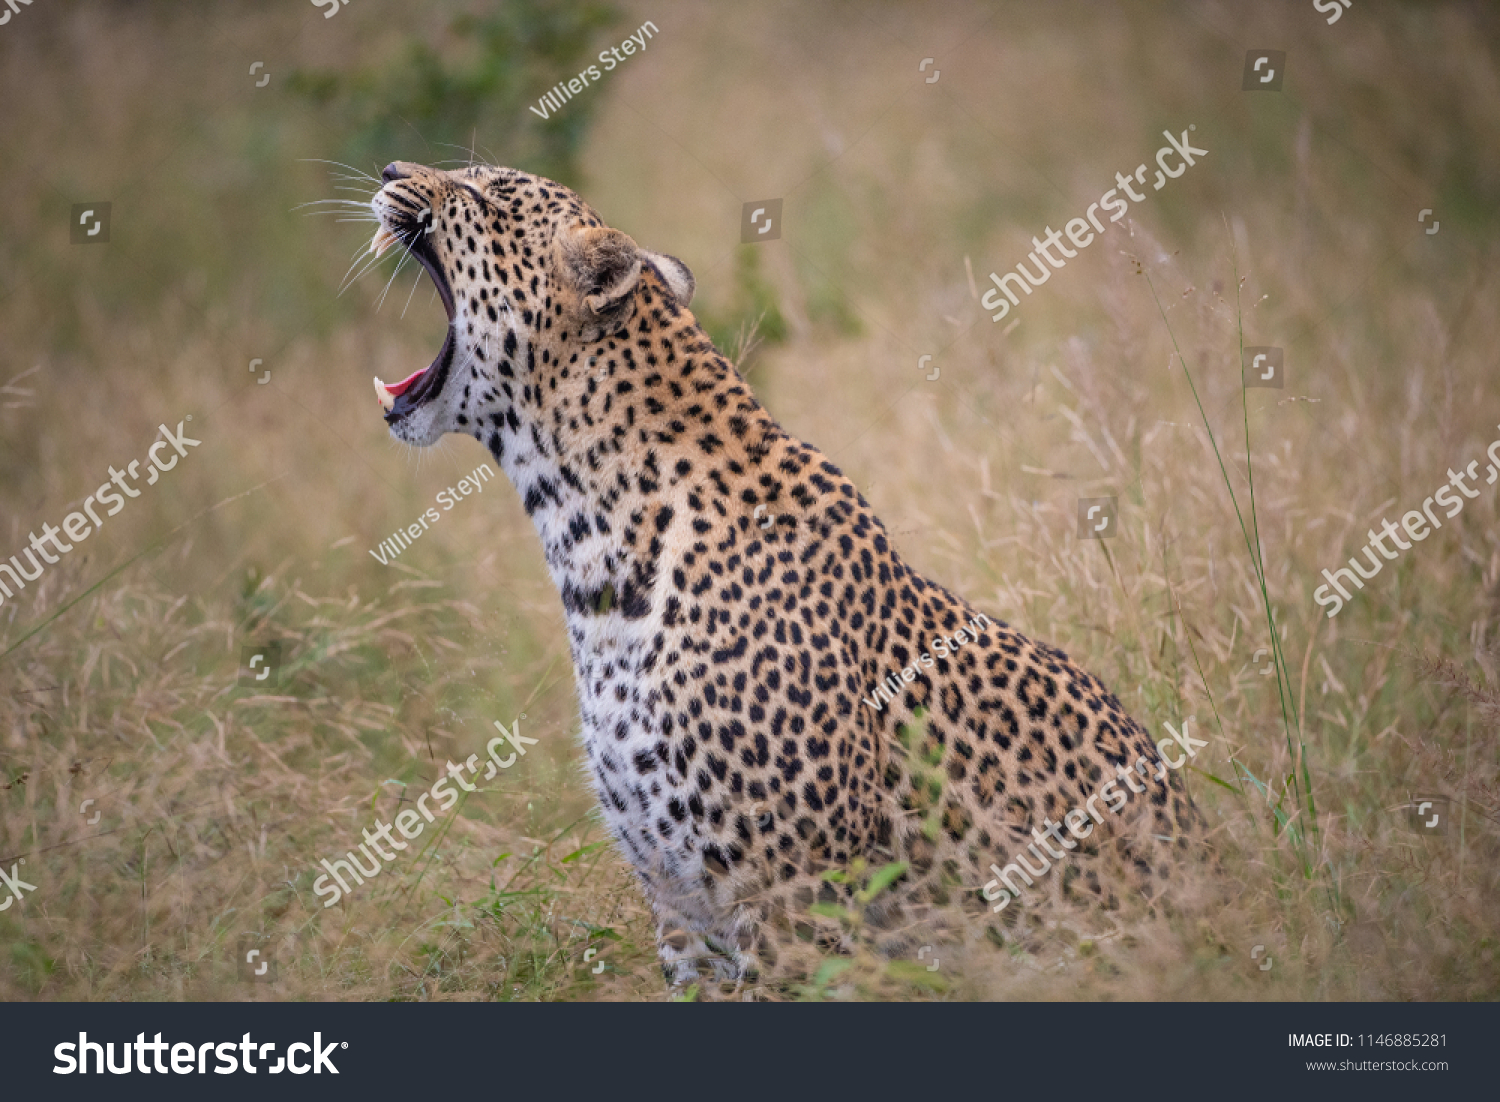 A horizontal, colour photograph of a yawning leopard, Panthera pardus, sitting in long dry grass in Djuma private game reserve, South Africa. #1146885281